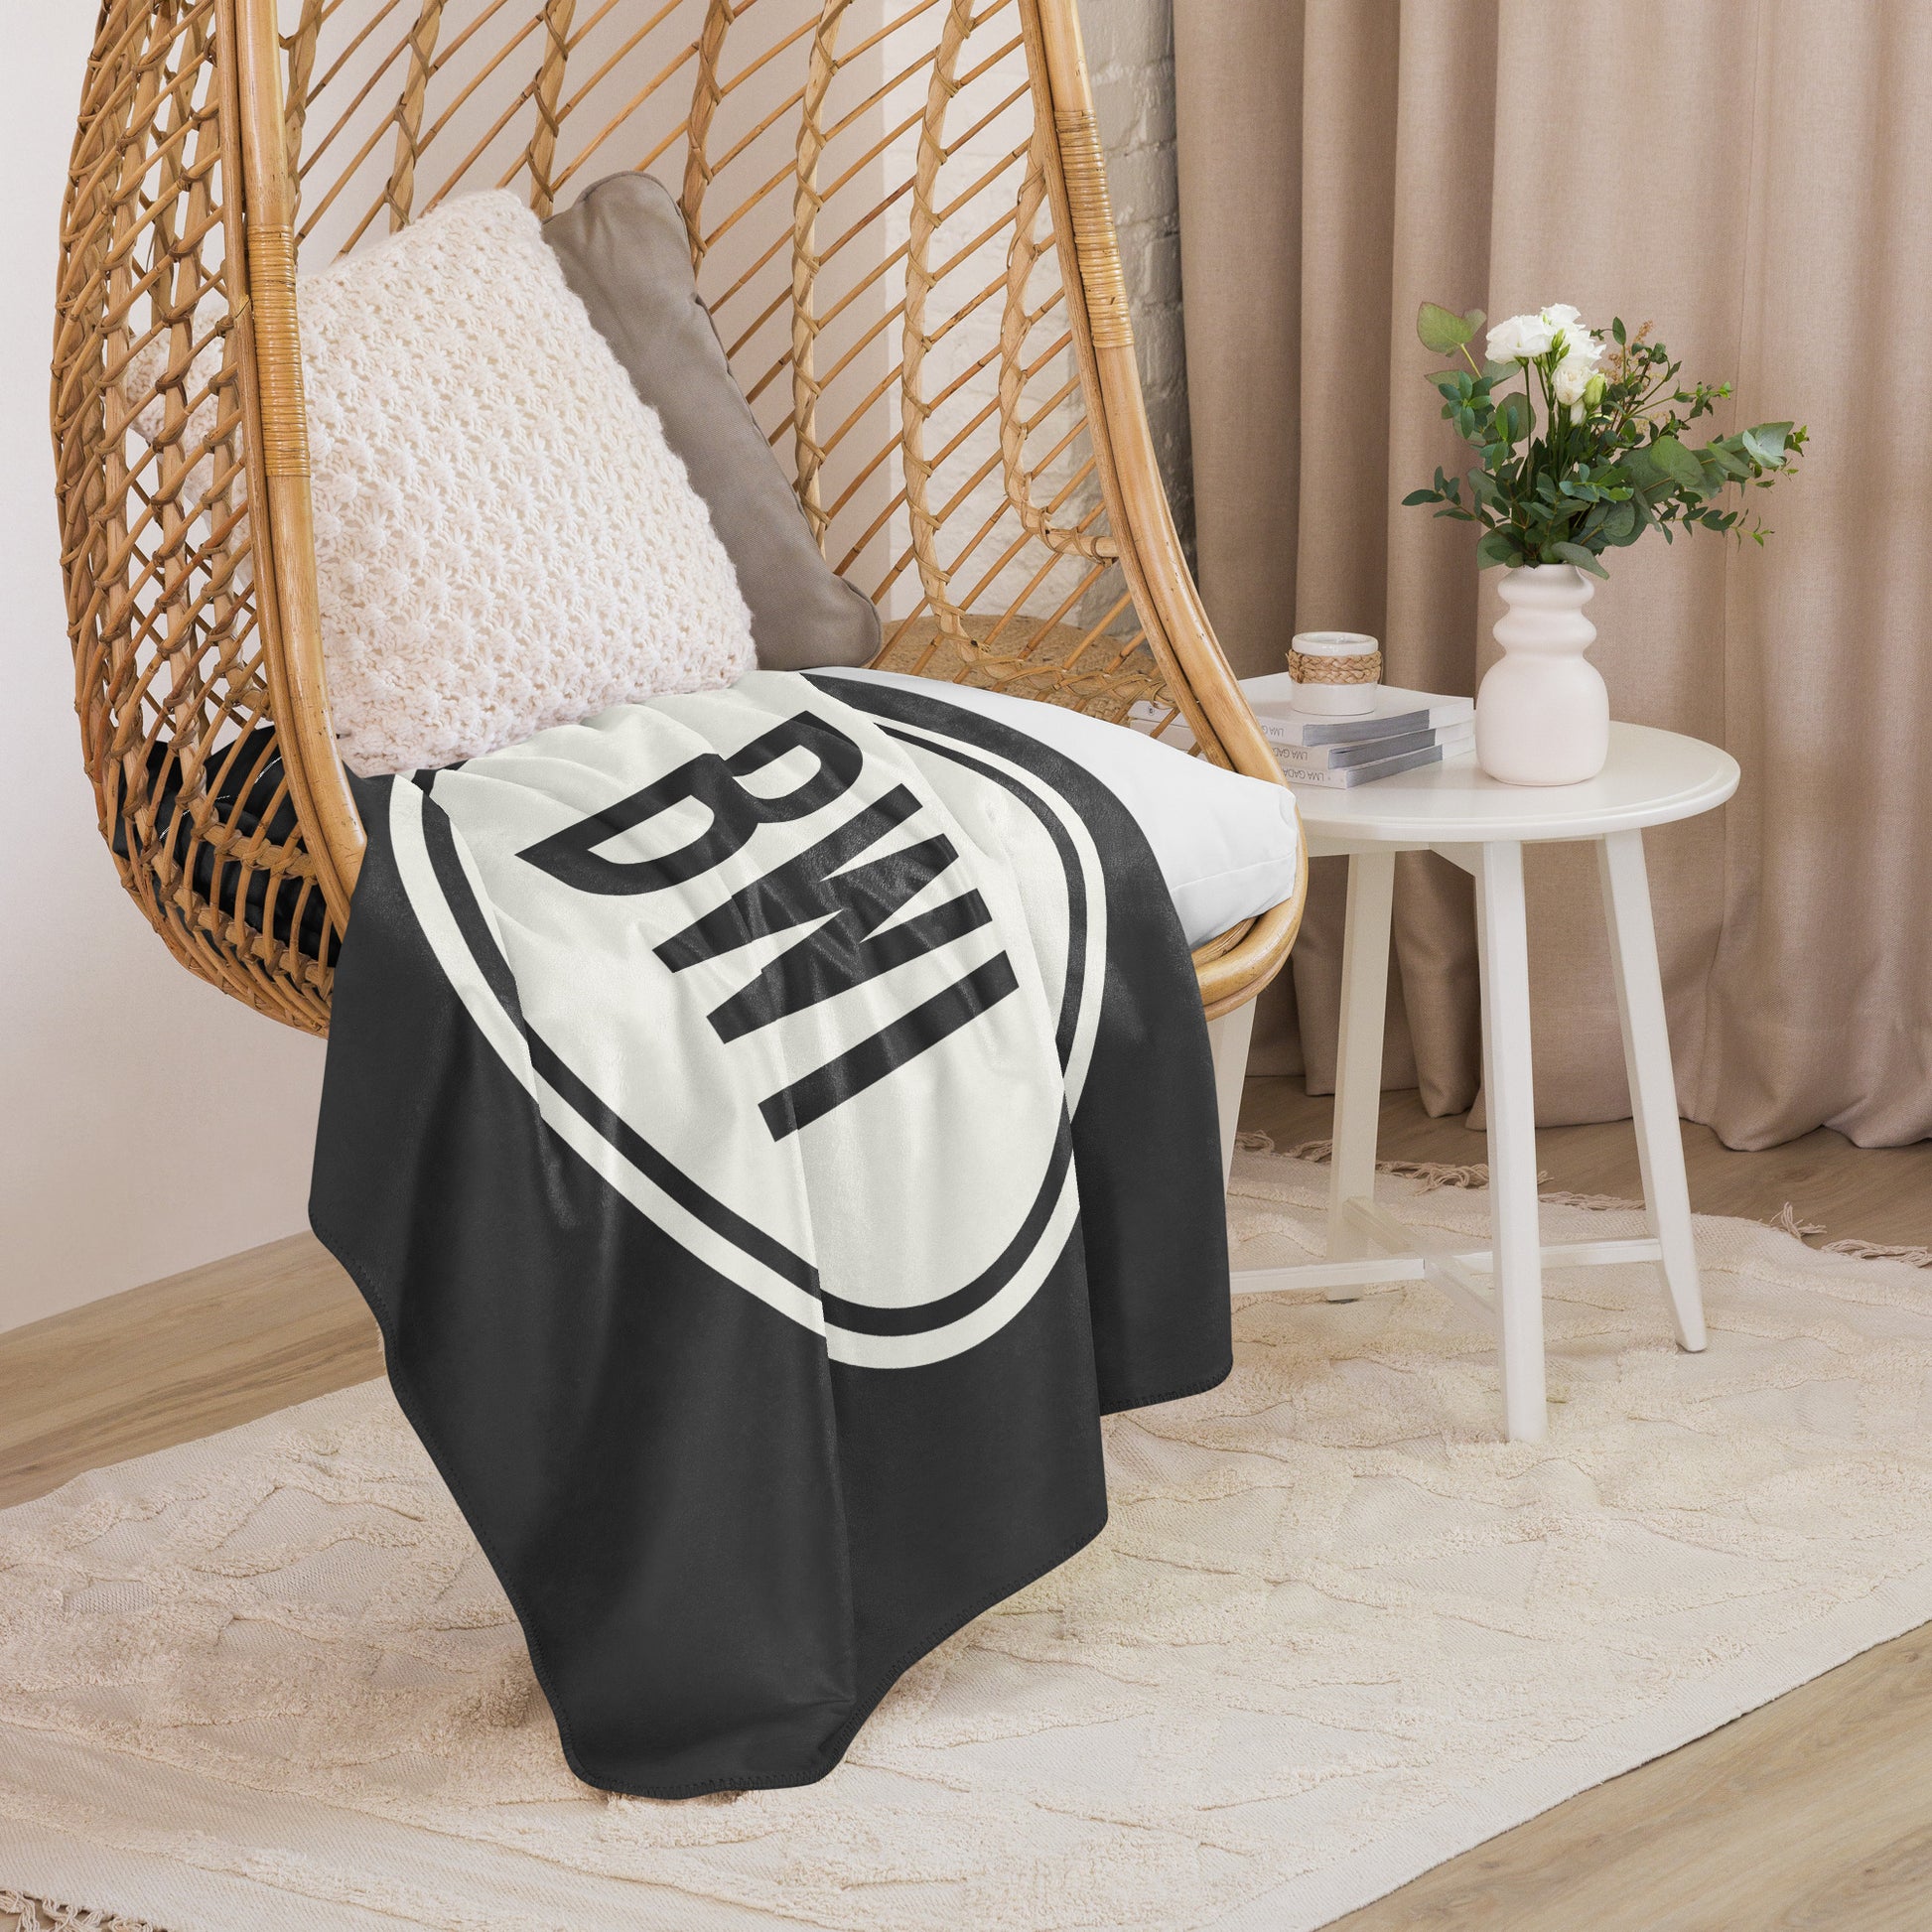 Unique Travel Gift Sherpa Blanket - White Oval • BWI Baltimore • YHM Designs - Image 06